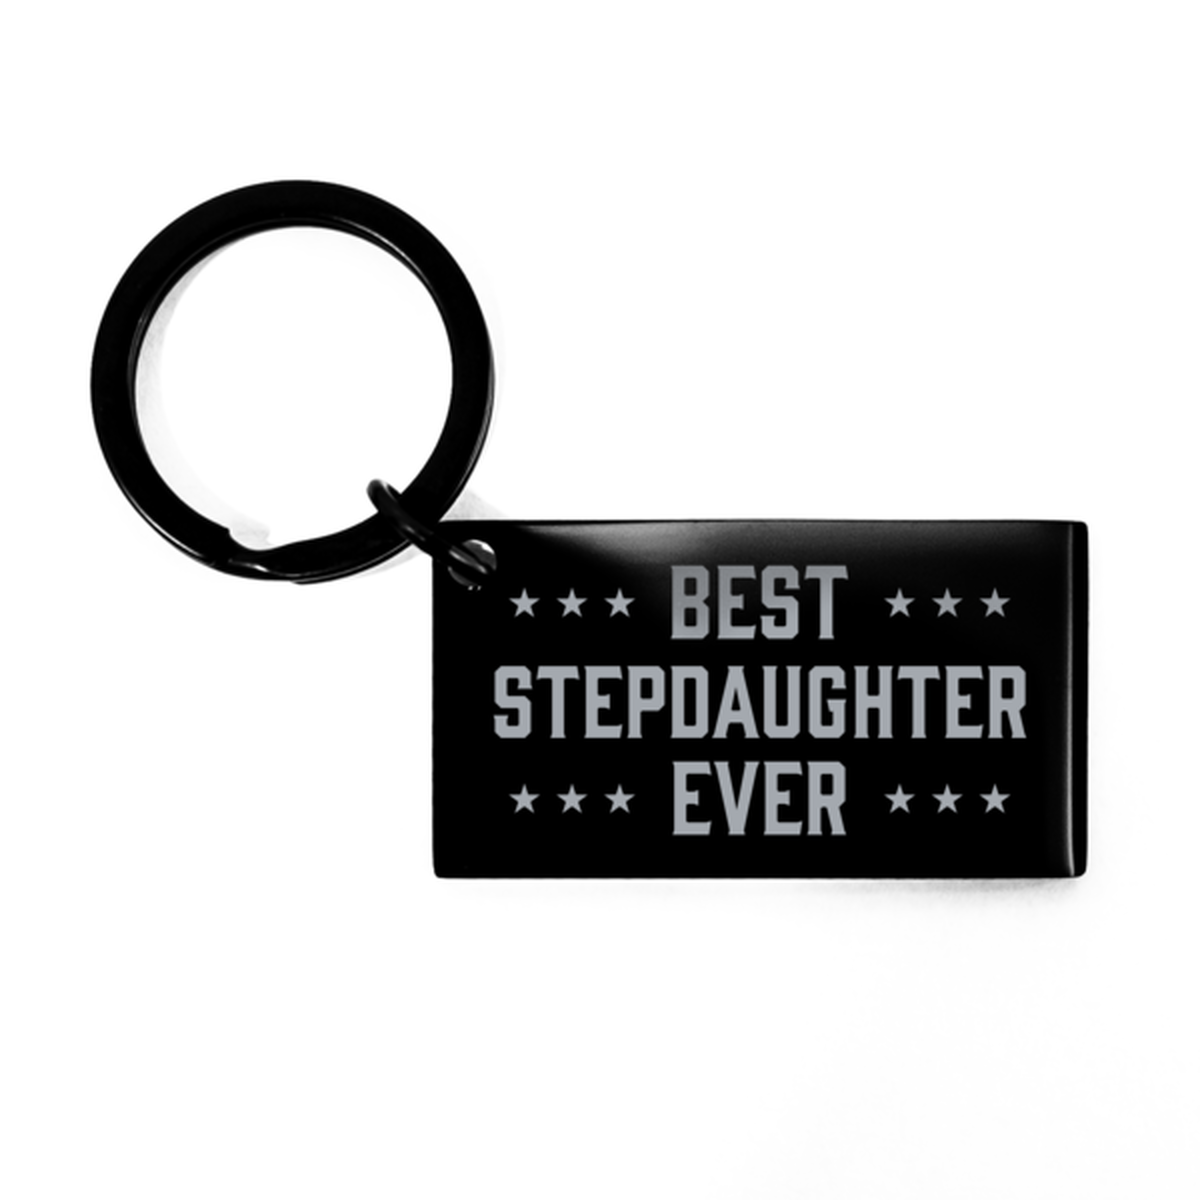 Best Stepdaughter Ever Stepdaughter Gifts, Funny Black Keychain For Stepdaughter, Birthday Engraved Keyring Presents For Women